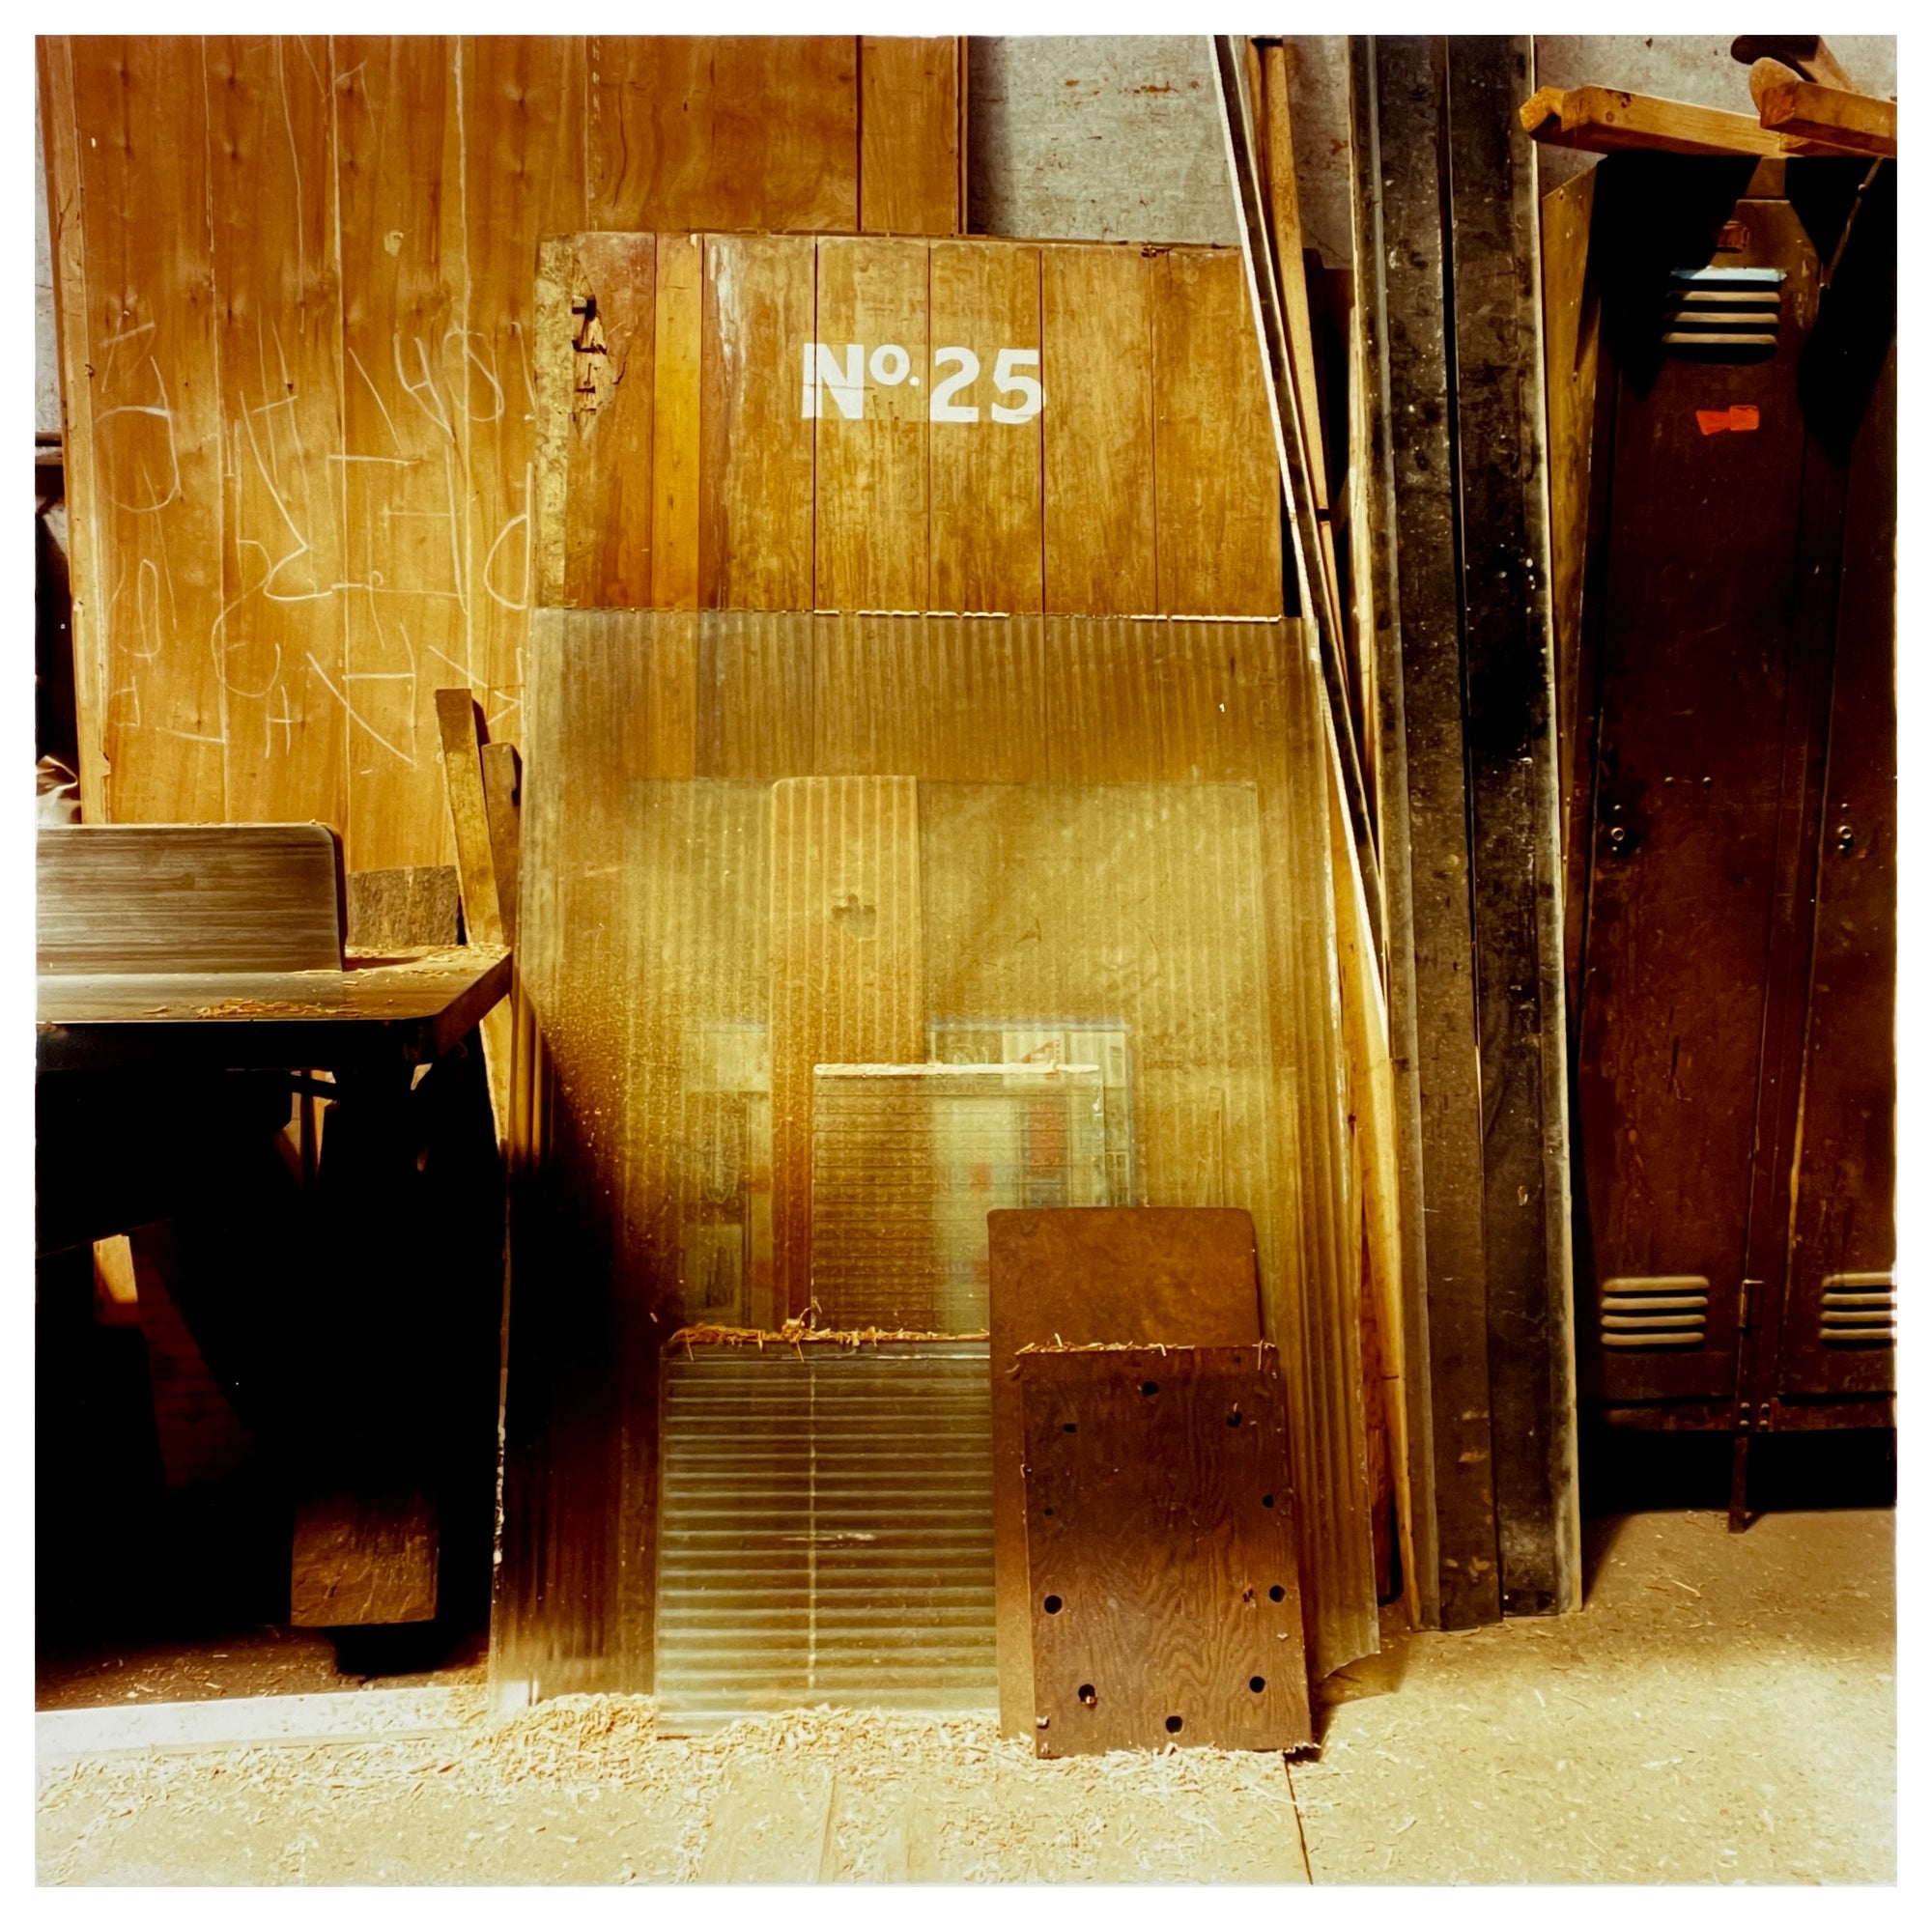 Photograph by Richard Heeps.  Inside the workshop old doors, bits of wood and corrugated plastic are leaning against the wall.  An old door has No.25 printed on it.